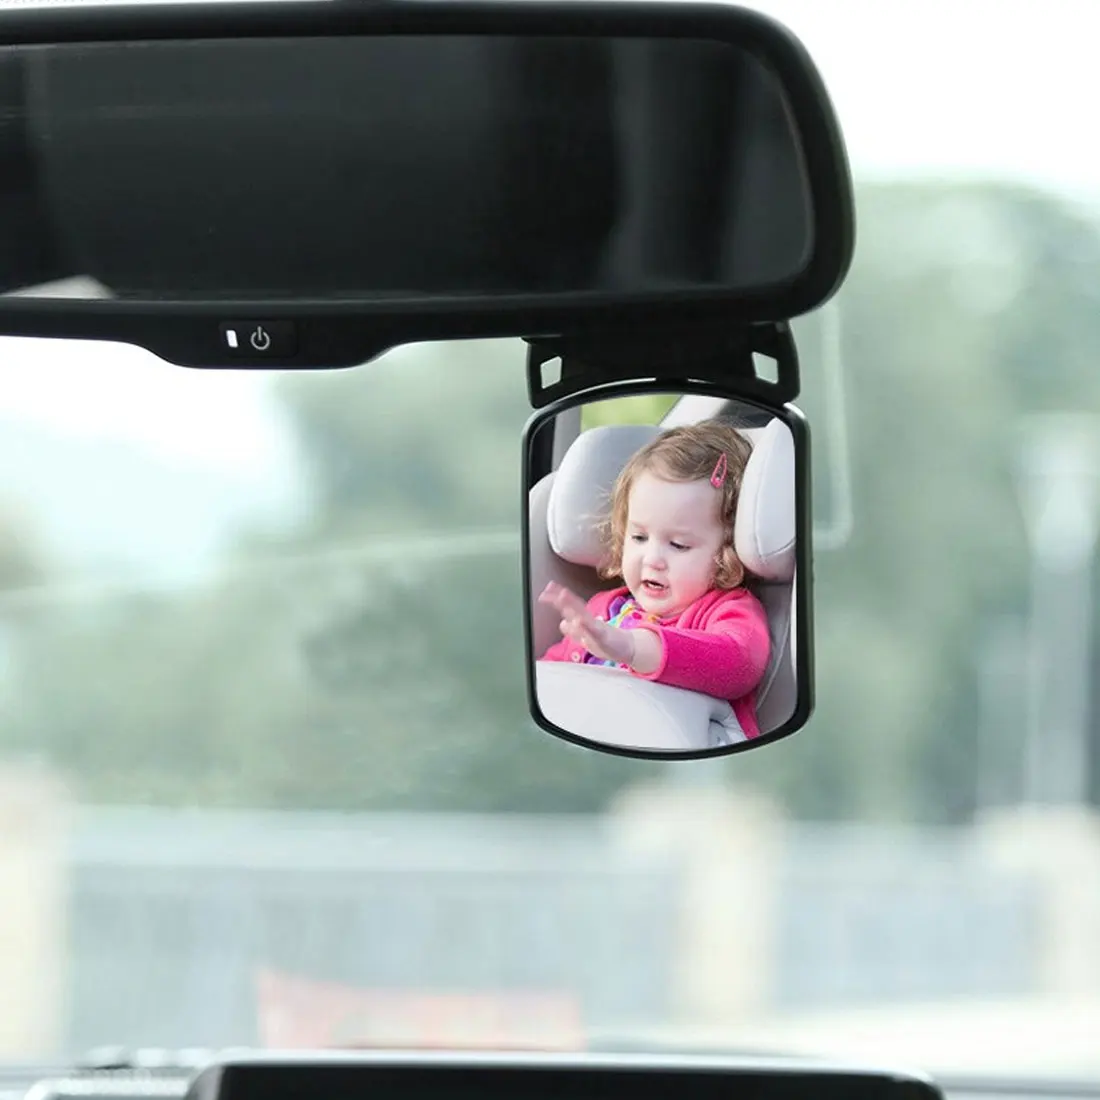 Adjustable Safe Baby Car Mirror for Rear View Facing Back Seat for Infant Child Backseat Shatterproof Mirror